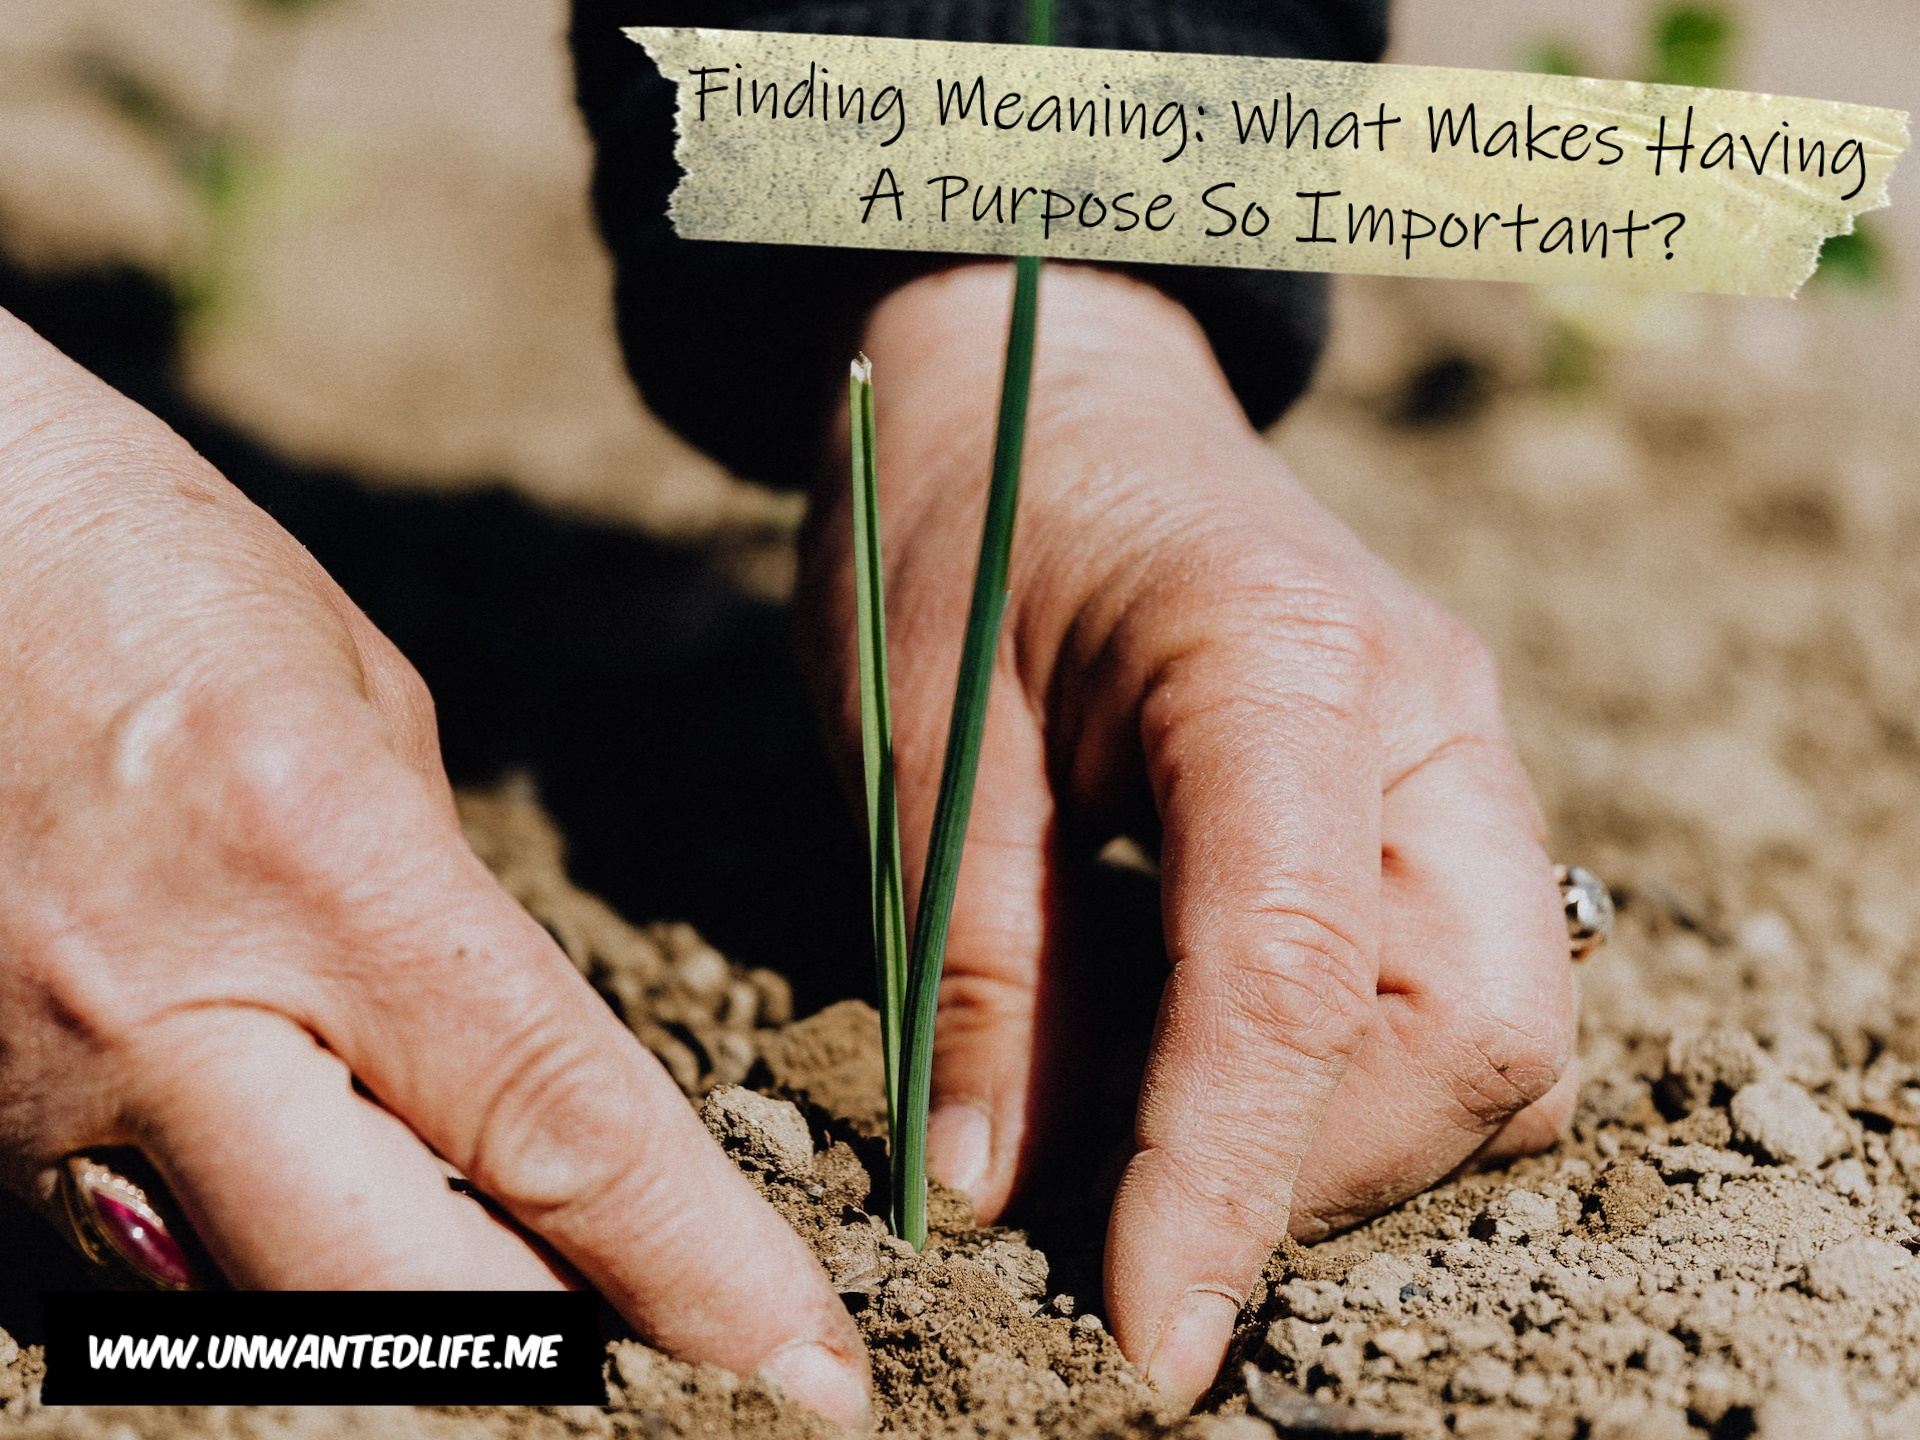 An image of a person planting a small green plant in the ground to represent the topic of the article - Finding Meaning: What Makes Having A Purpose So Important?